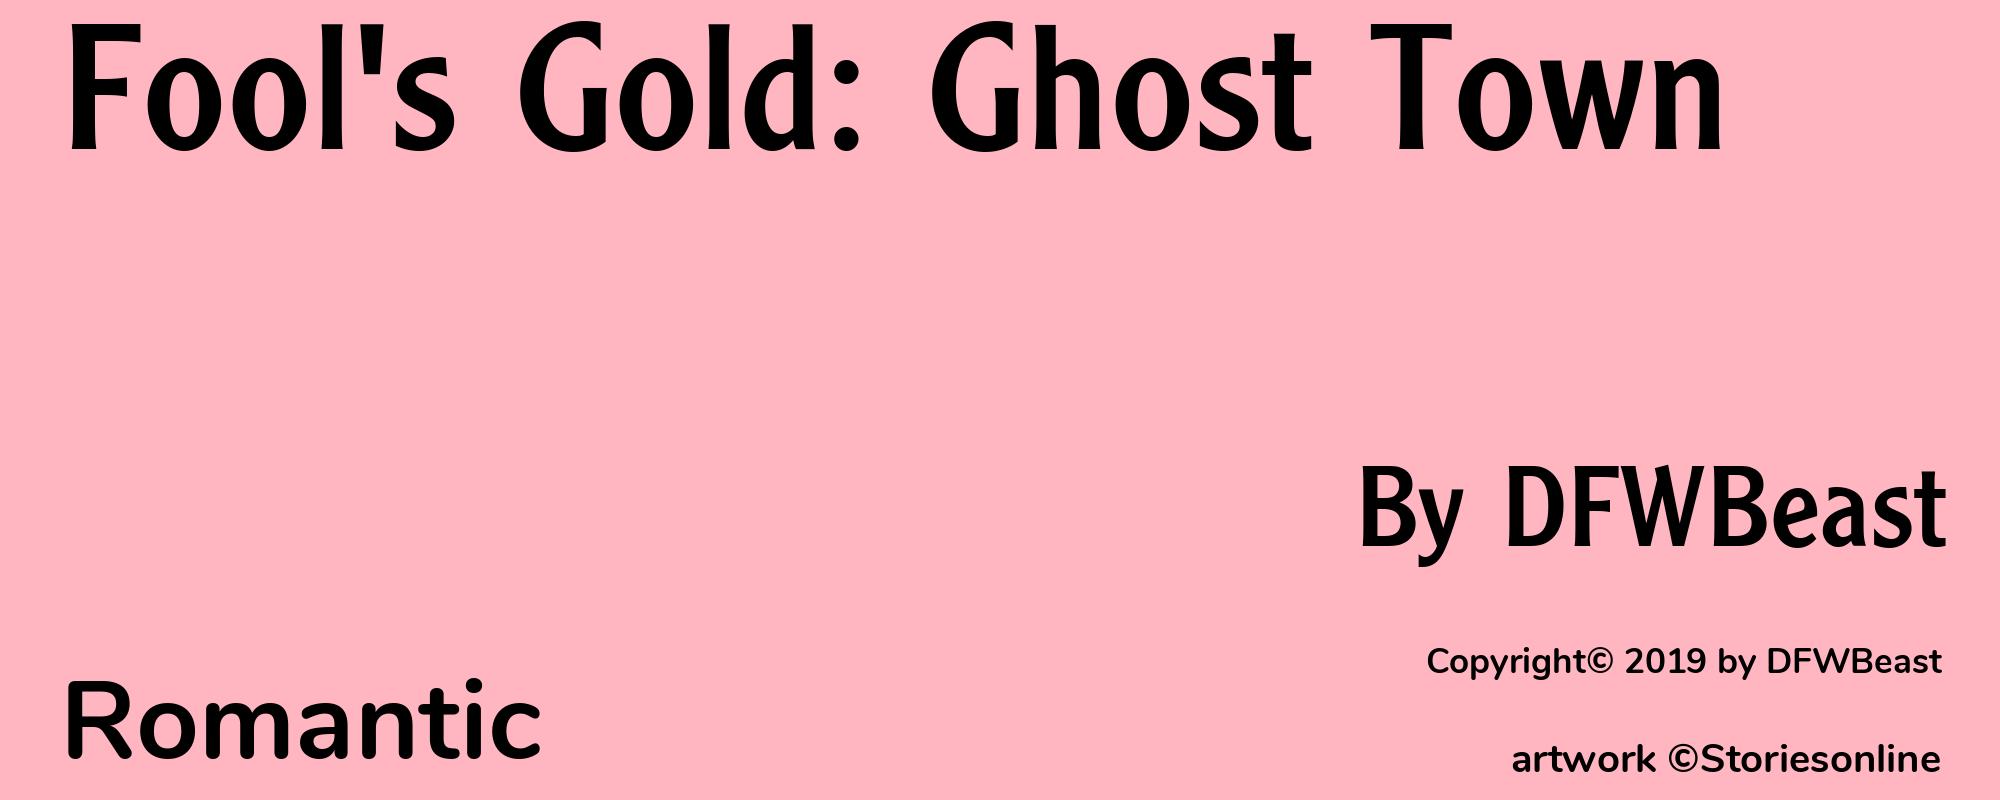 Fool's Gold: Ghost Town - Cover